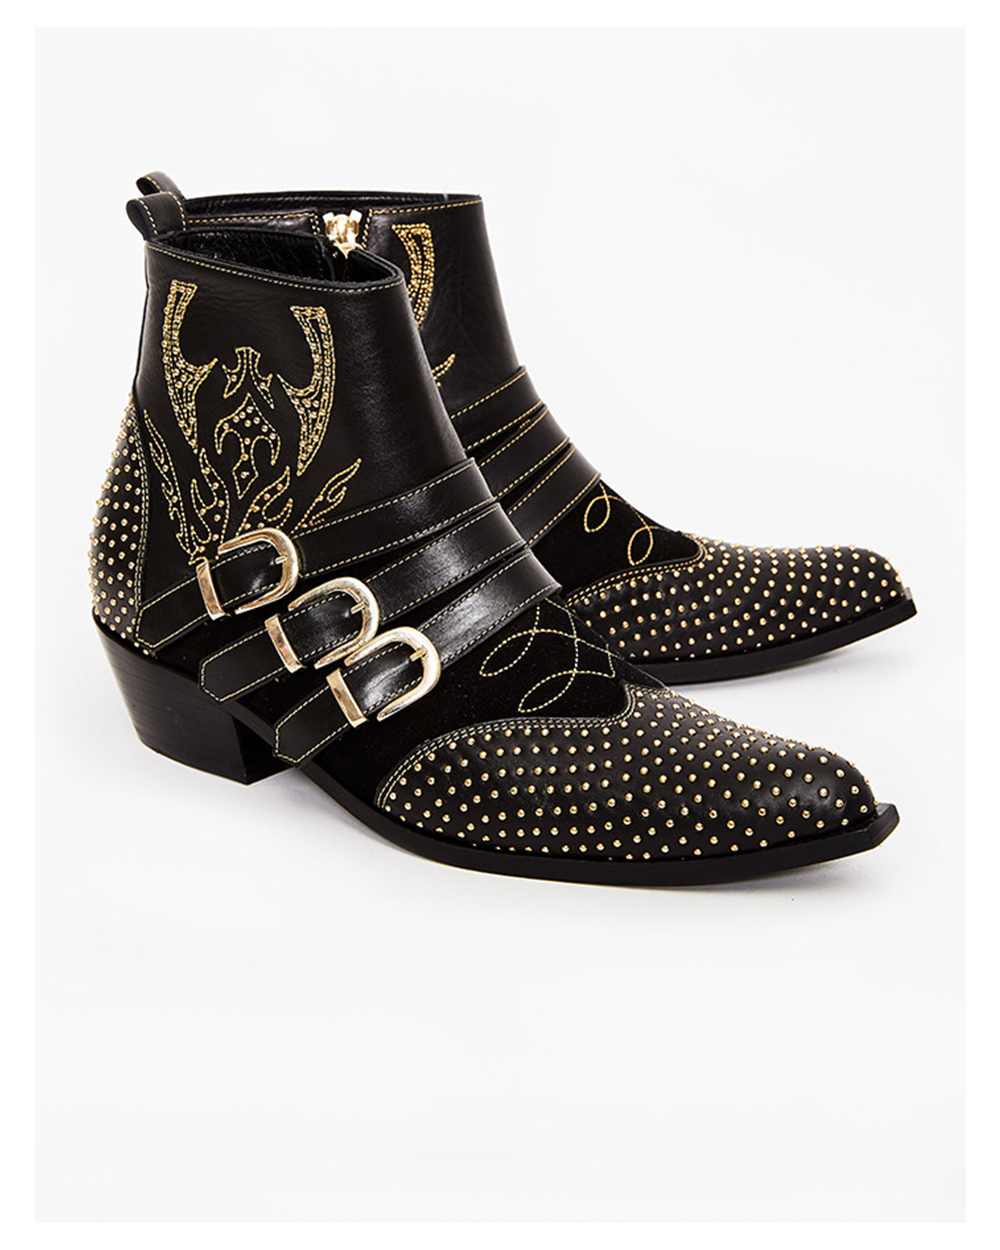 Anine Bing Penny Boots, $1329 from Superette